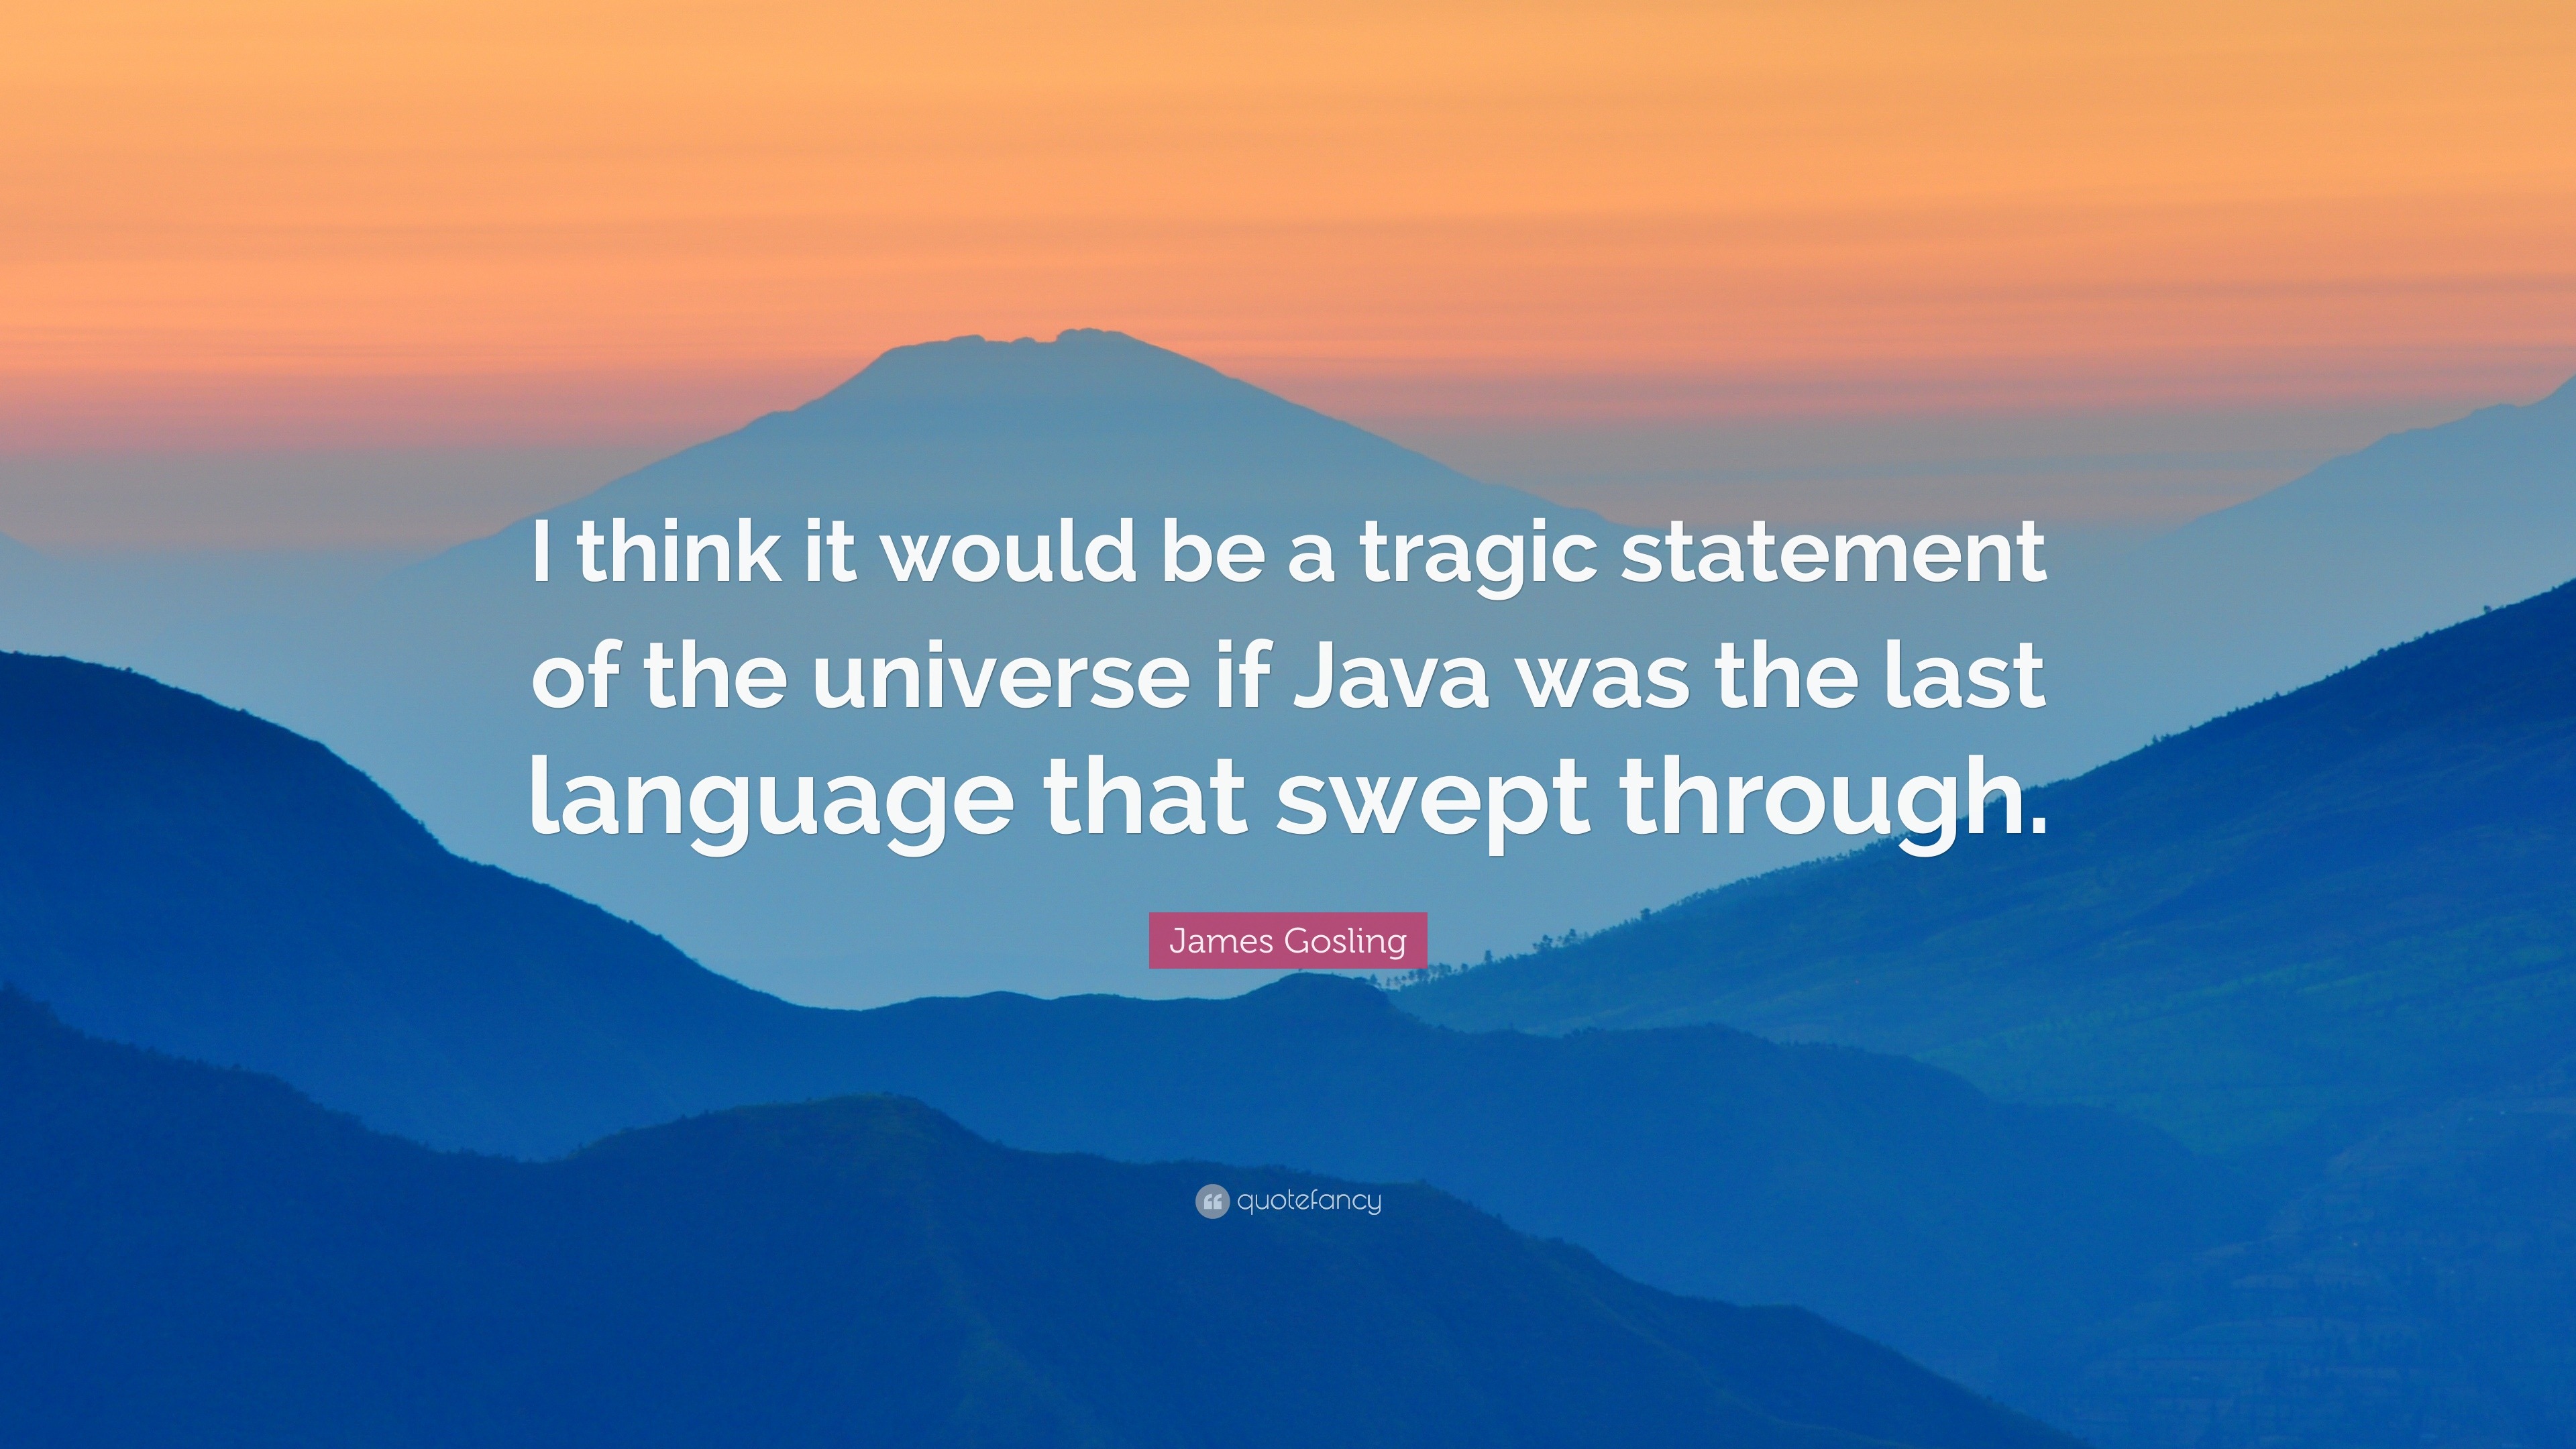 James Gosling Quote: “I think it would be a tragic statement of the